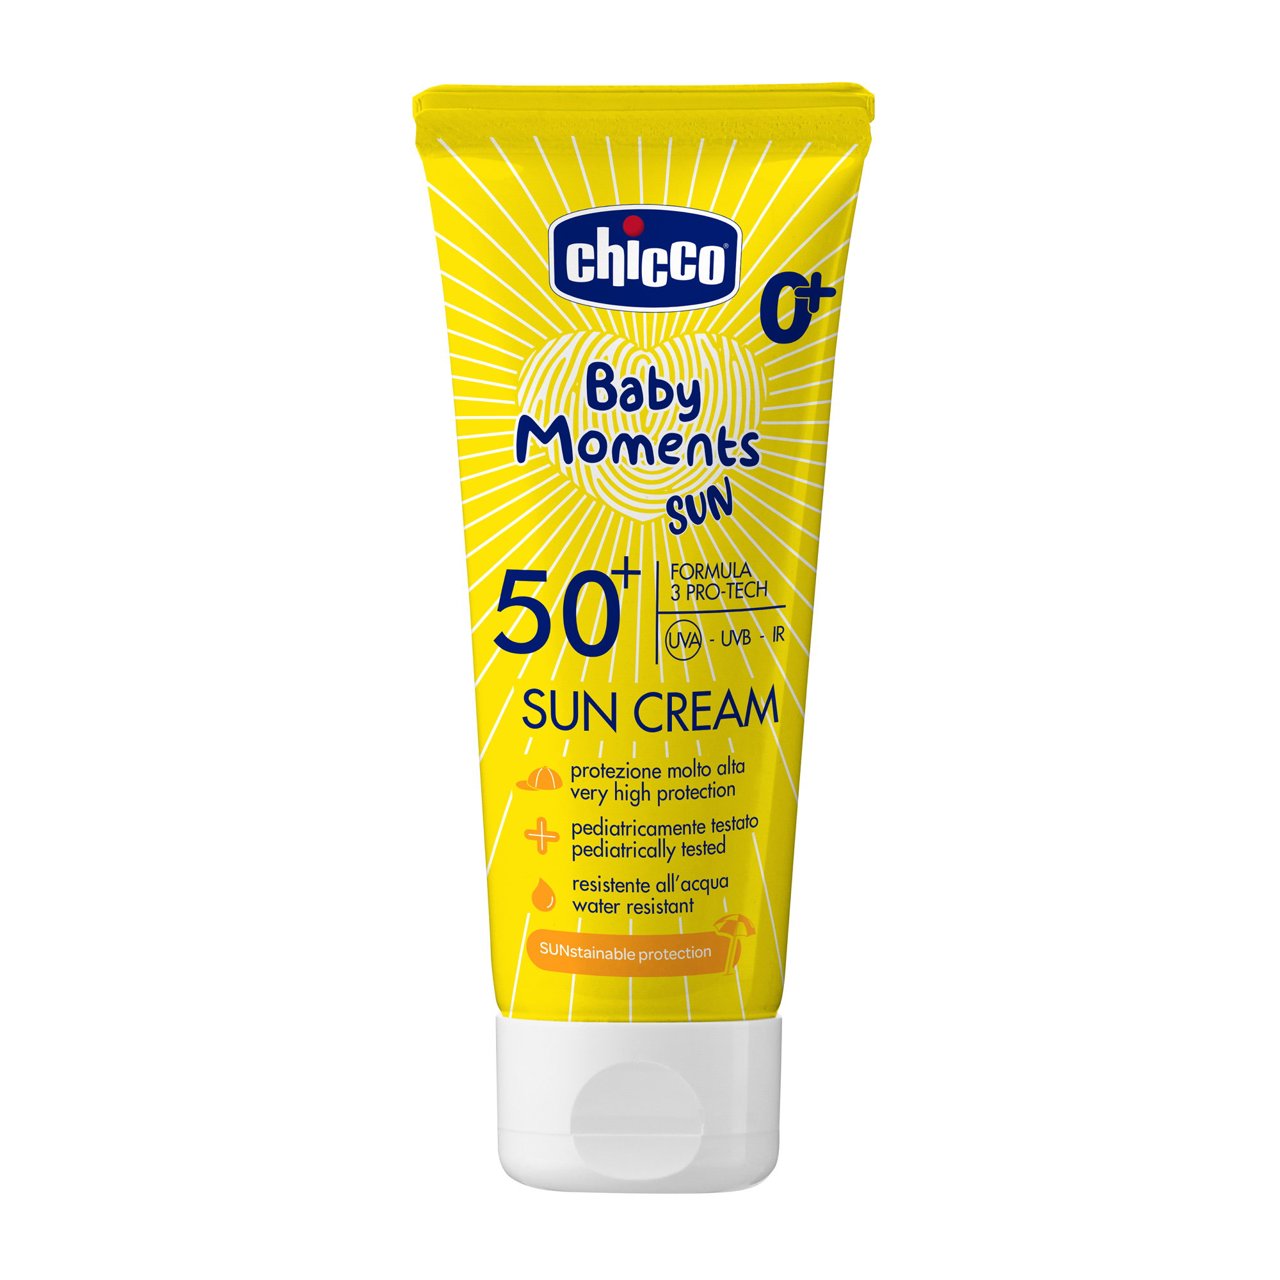 Baby Moments SUN - Crema solare SPF 50+ 75 ml. image number 0